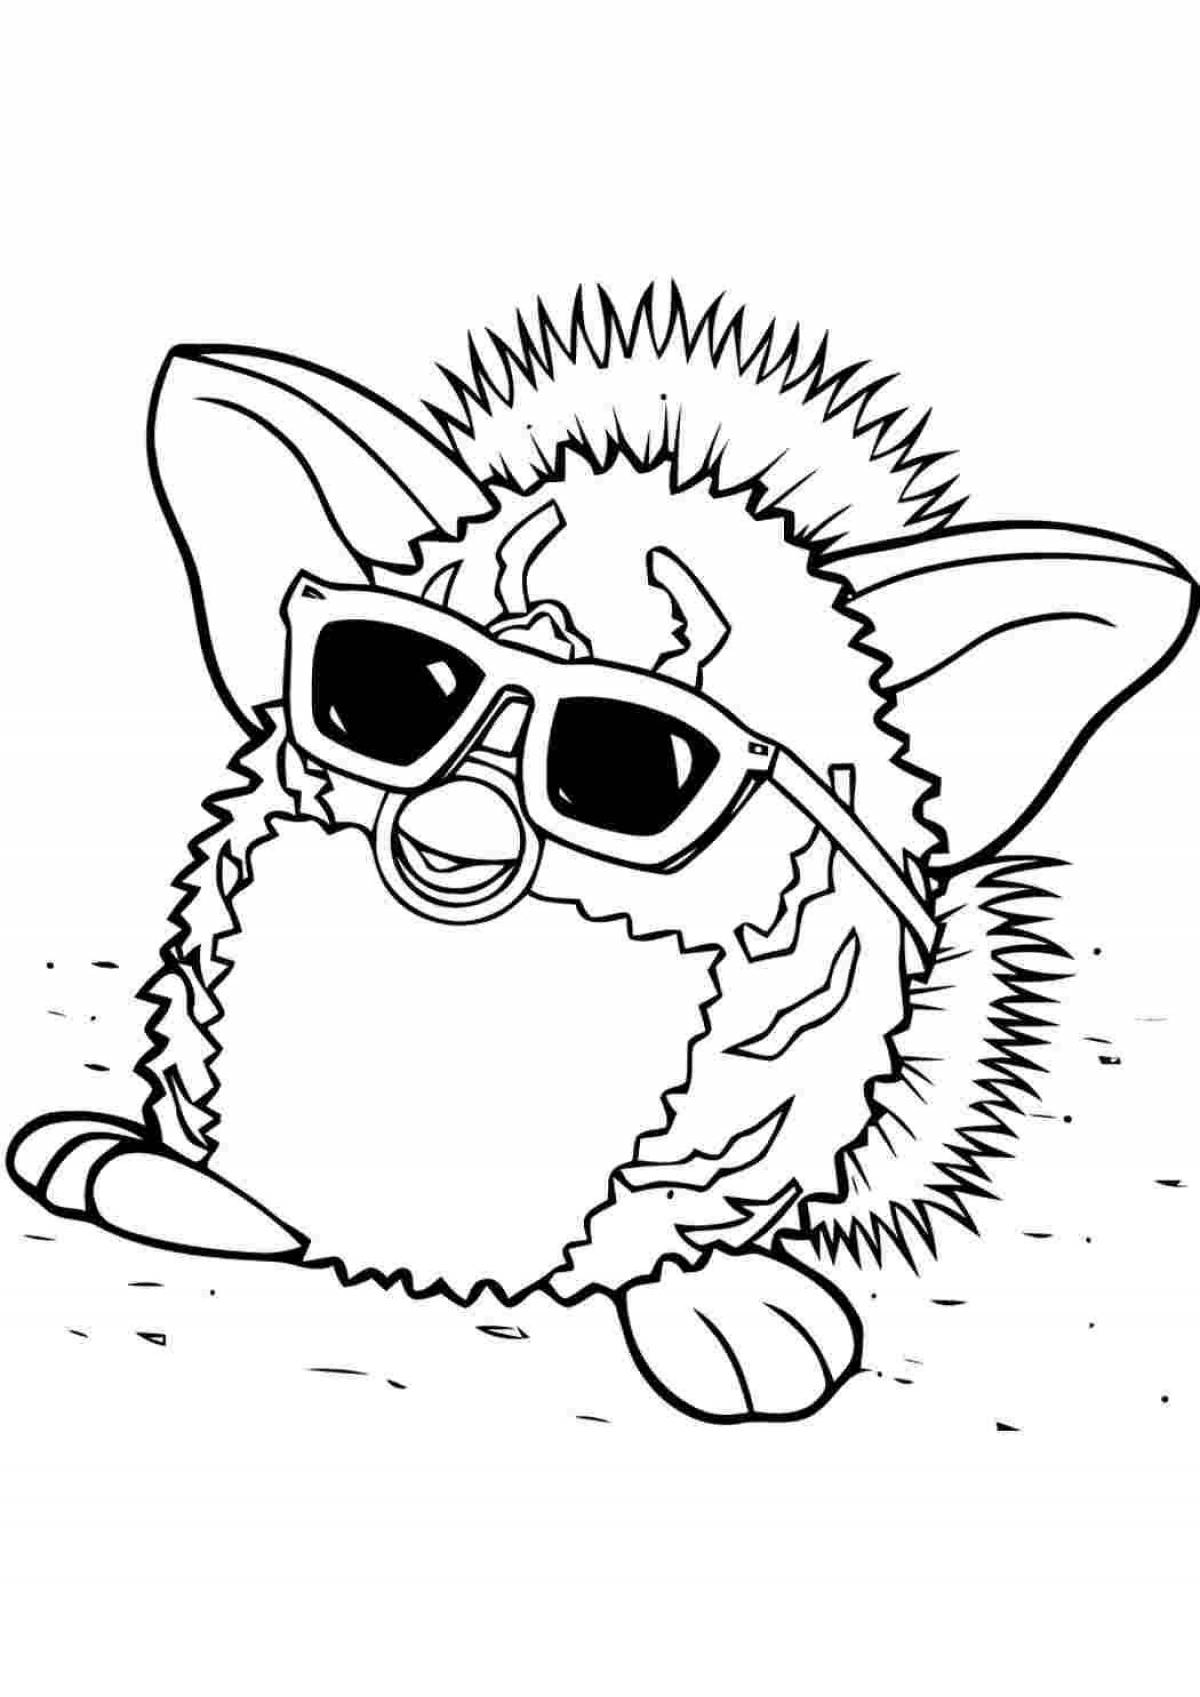 Funny furby coloring